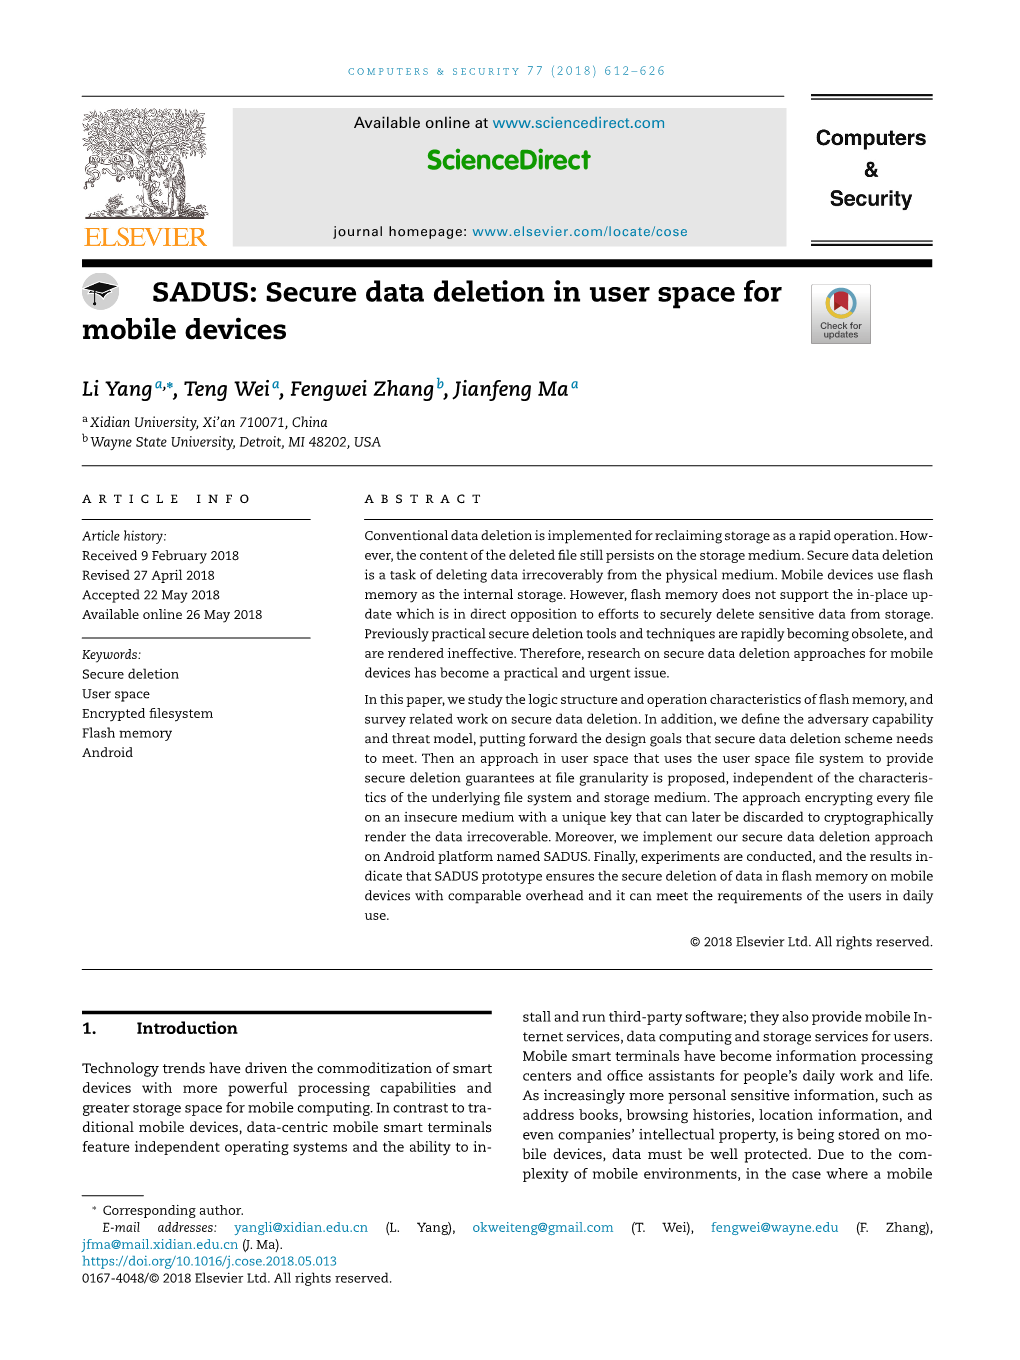 SADUS: Secure Data Deletion in User Space for Mobile Devices